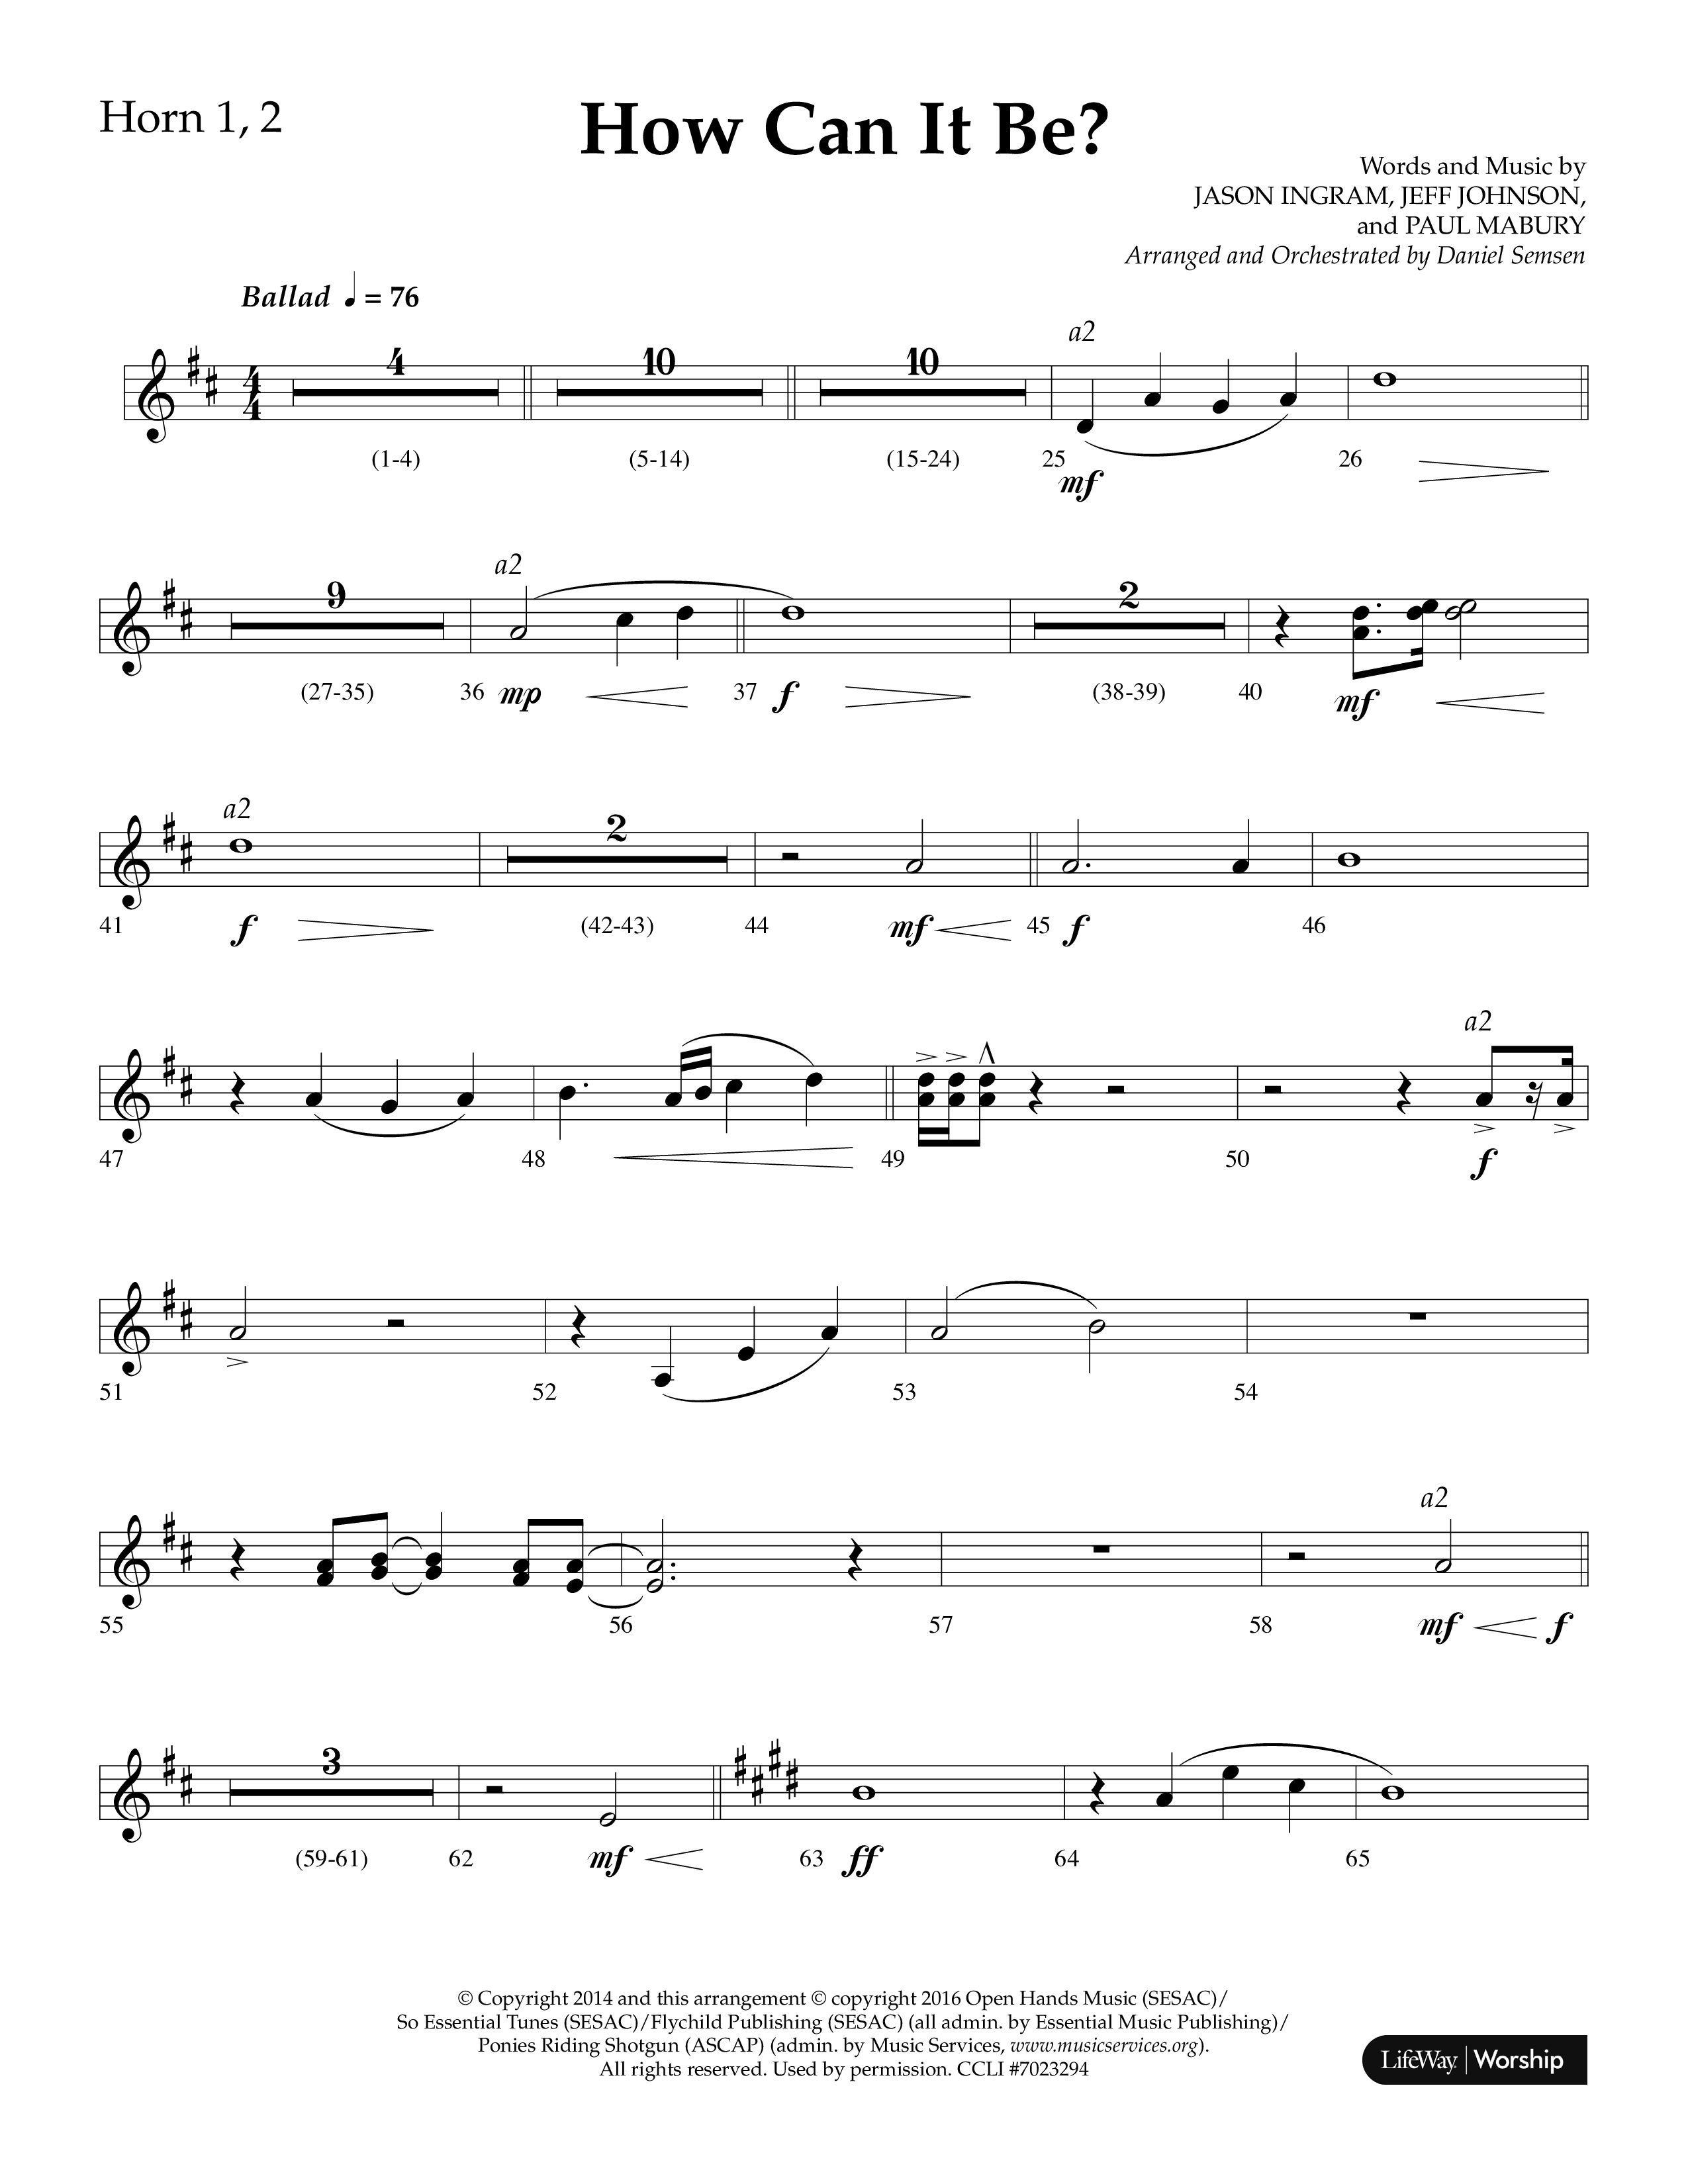 How Can It Be (Choral Anthem SATB) French Horn 1/2 (Lifeway Choral / Arr. Daniel Semsen)